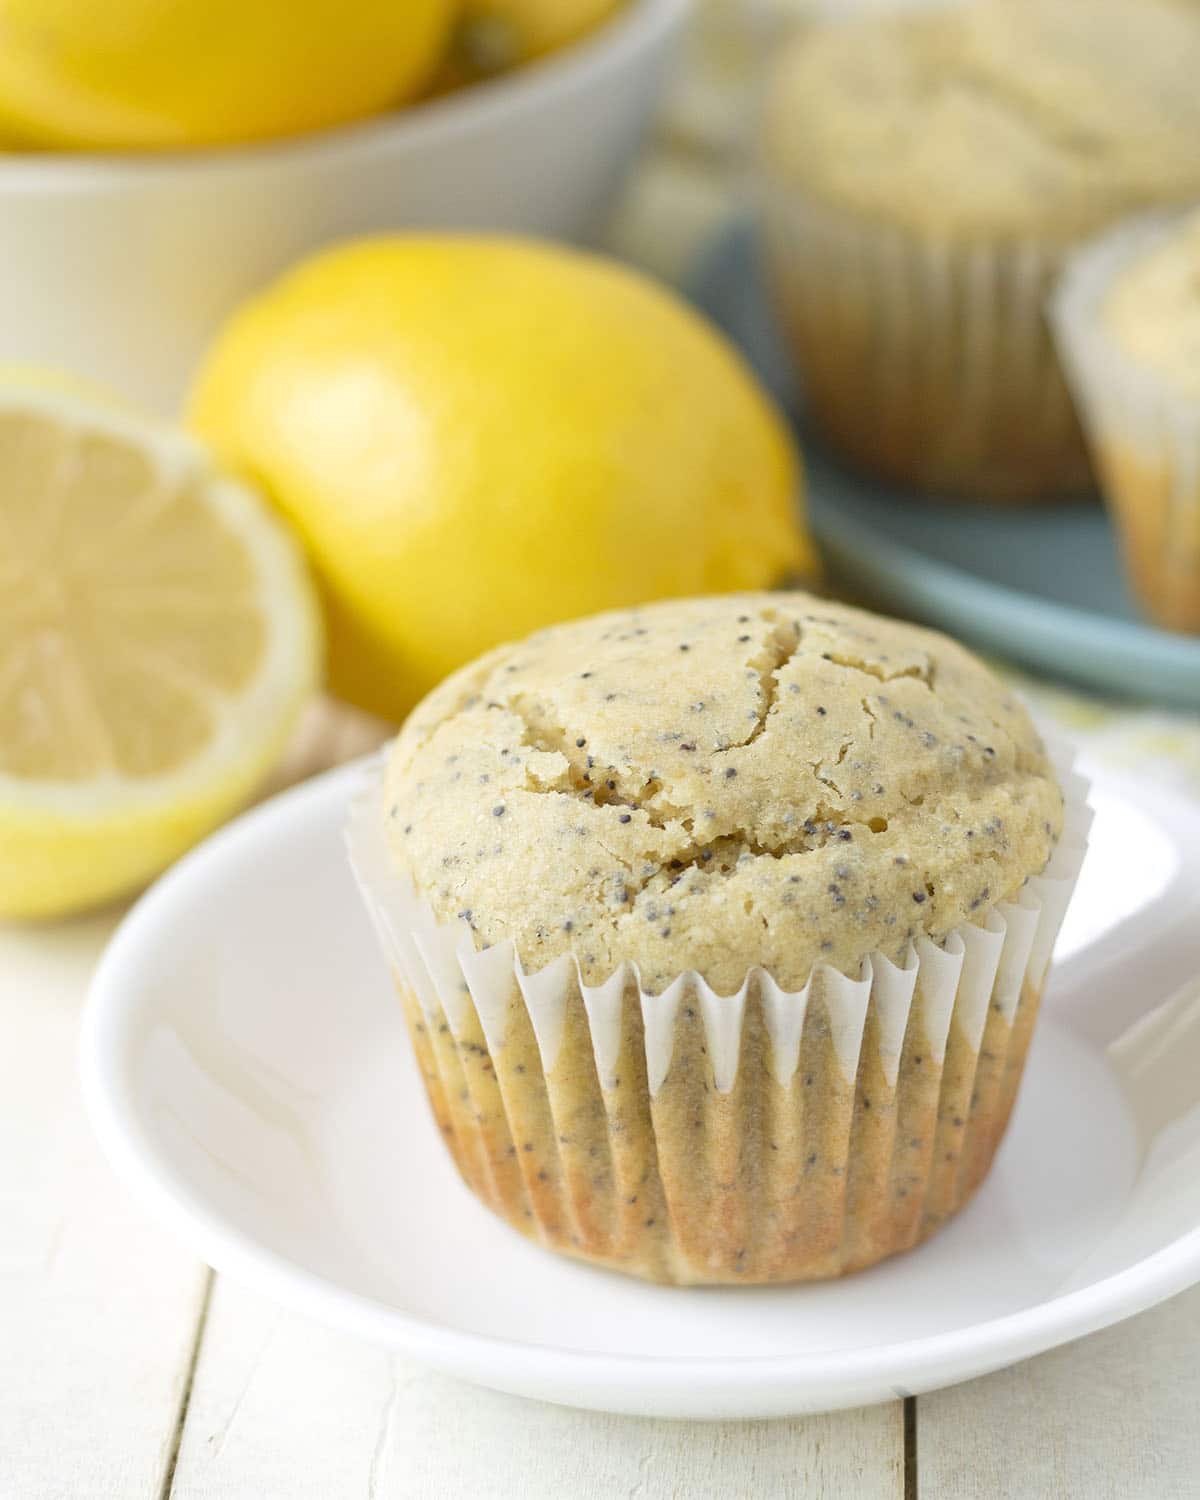 A muffin sitting on a small white plate.